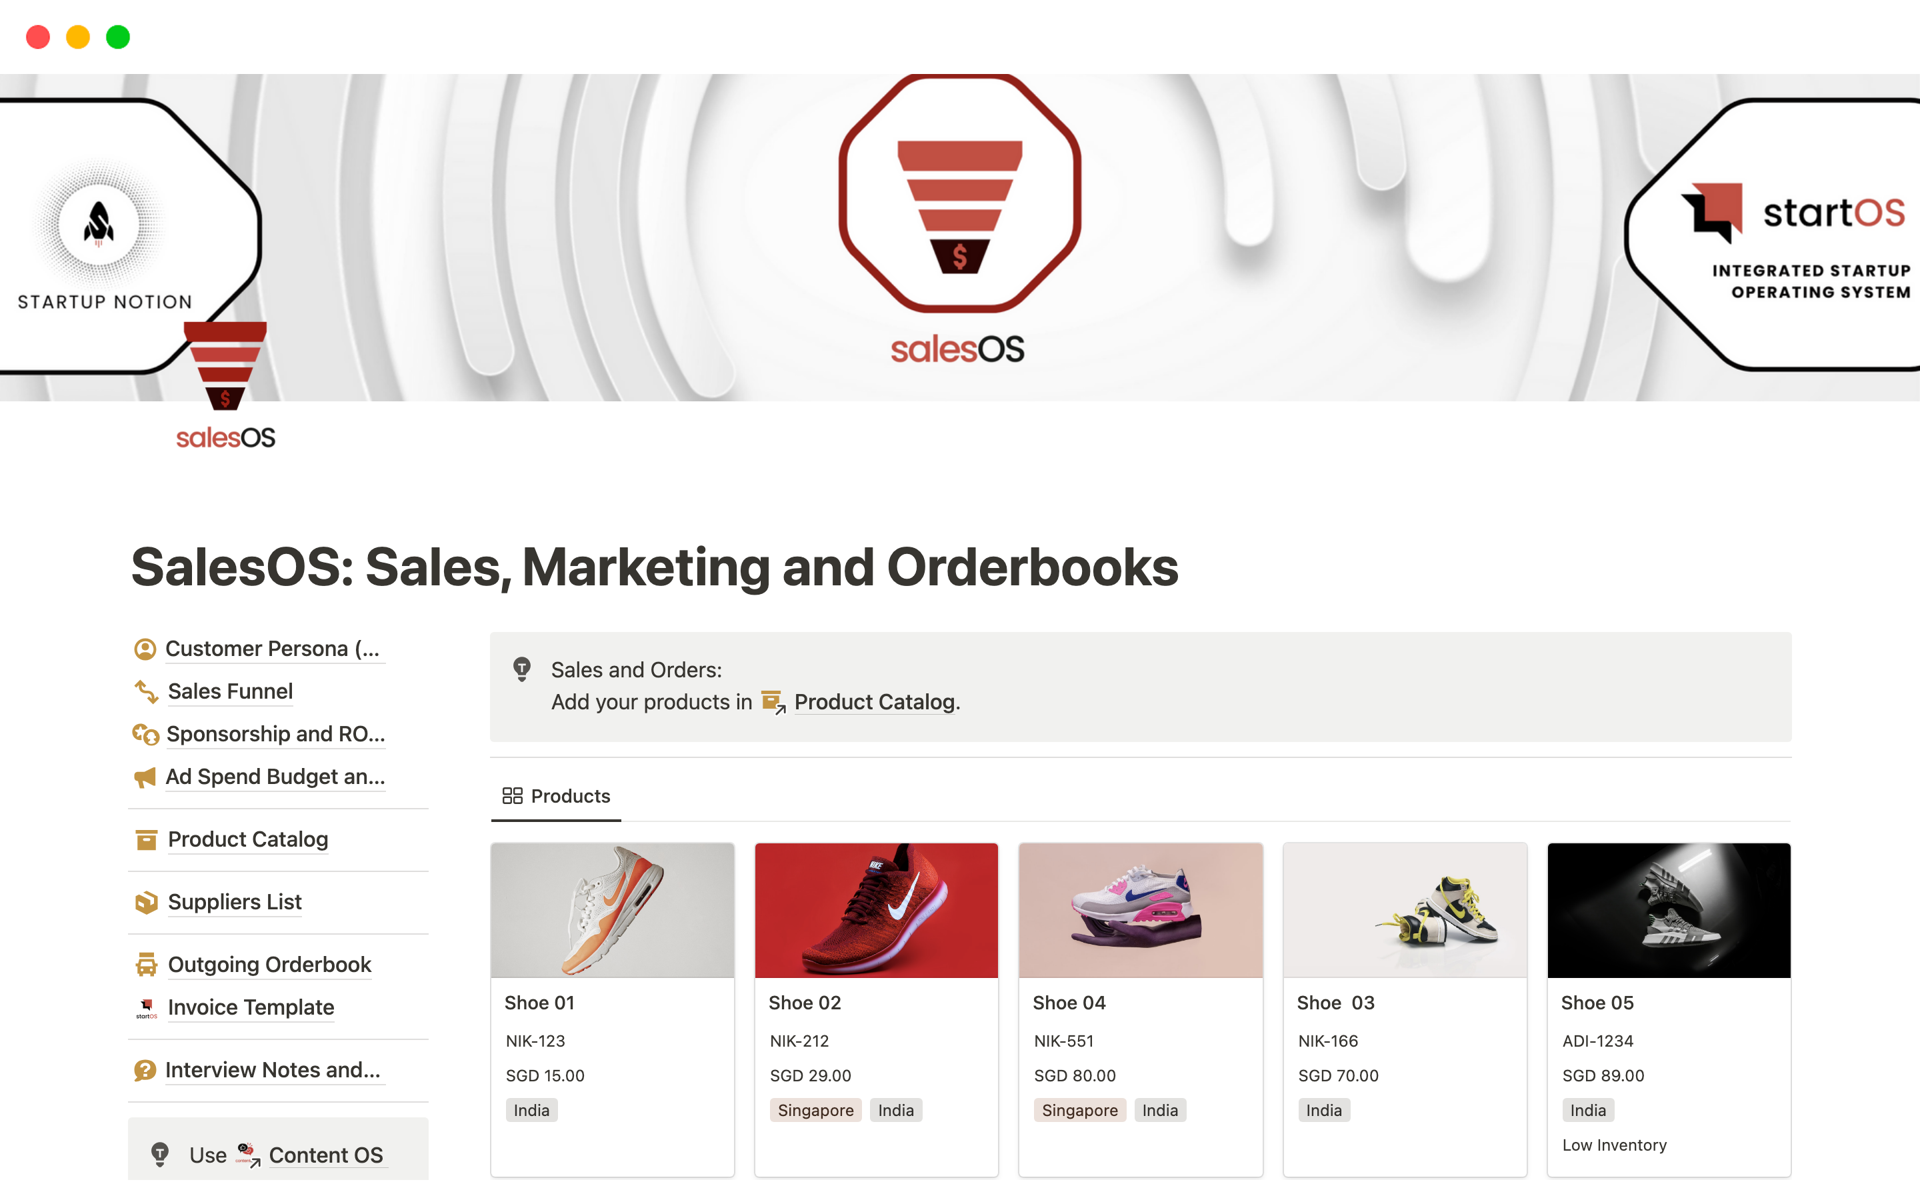 Sales and Marketing Planner for startups/ small businesses with inventory and orderbook.